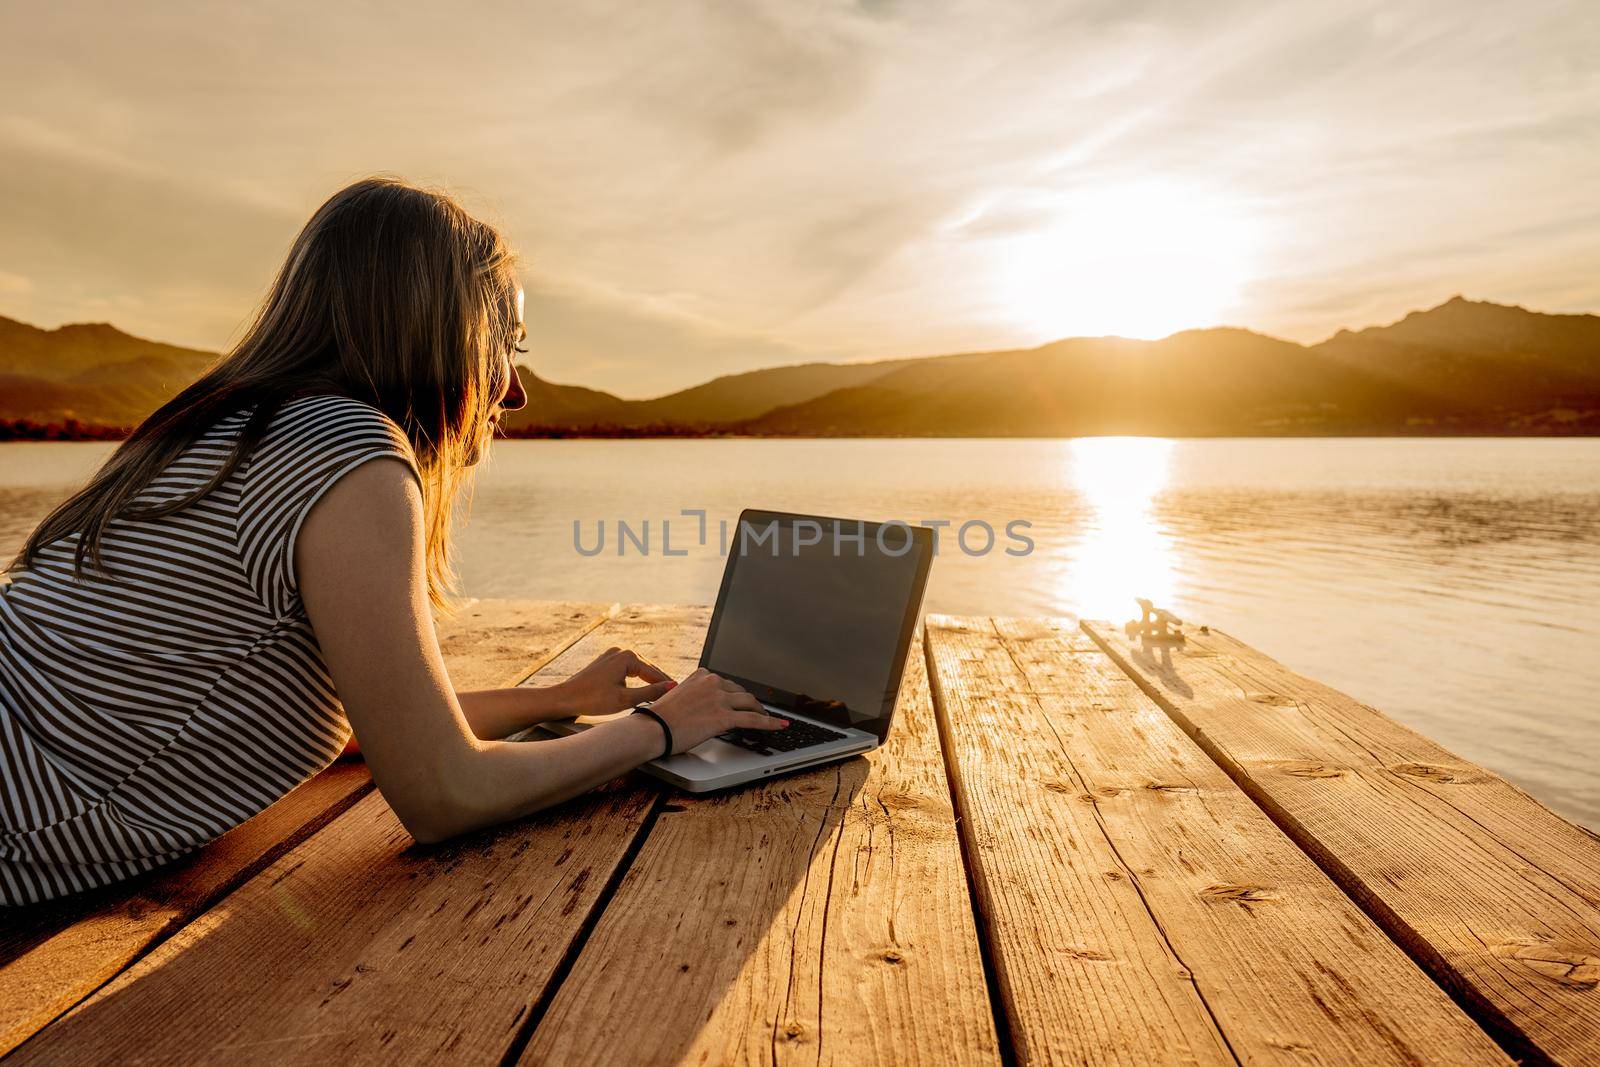 Young woman enjoying her creativeness writing book on a pier at sunset. New job opportunity at modern times to work everywhere using laptop and wifi internet connection technology. Girl studying